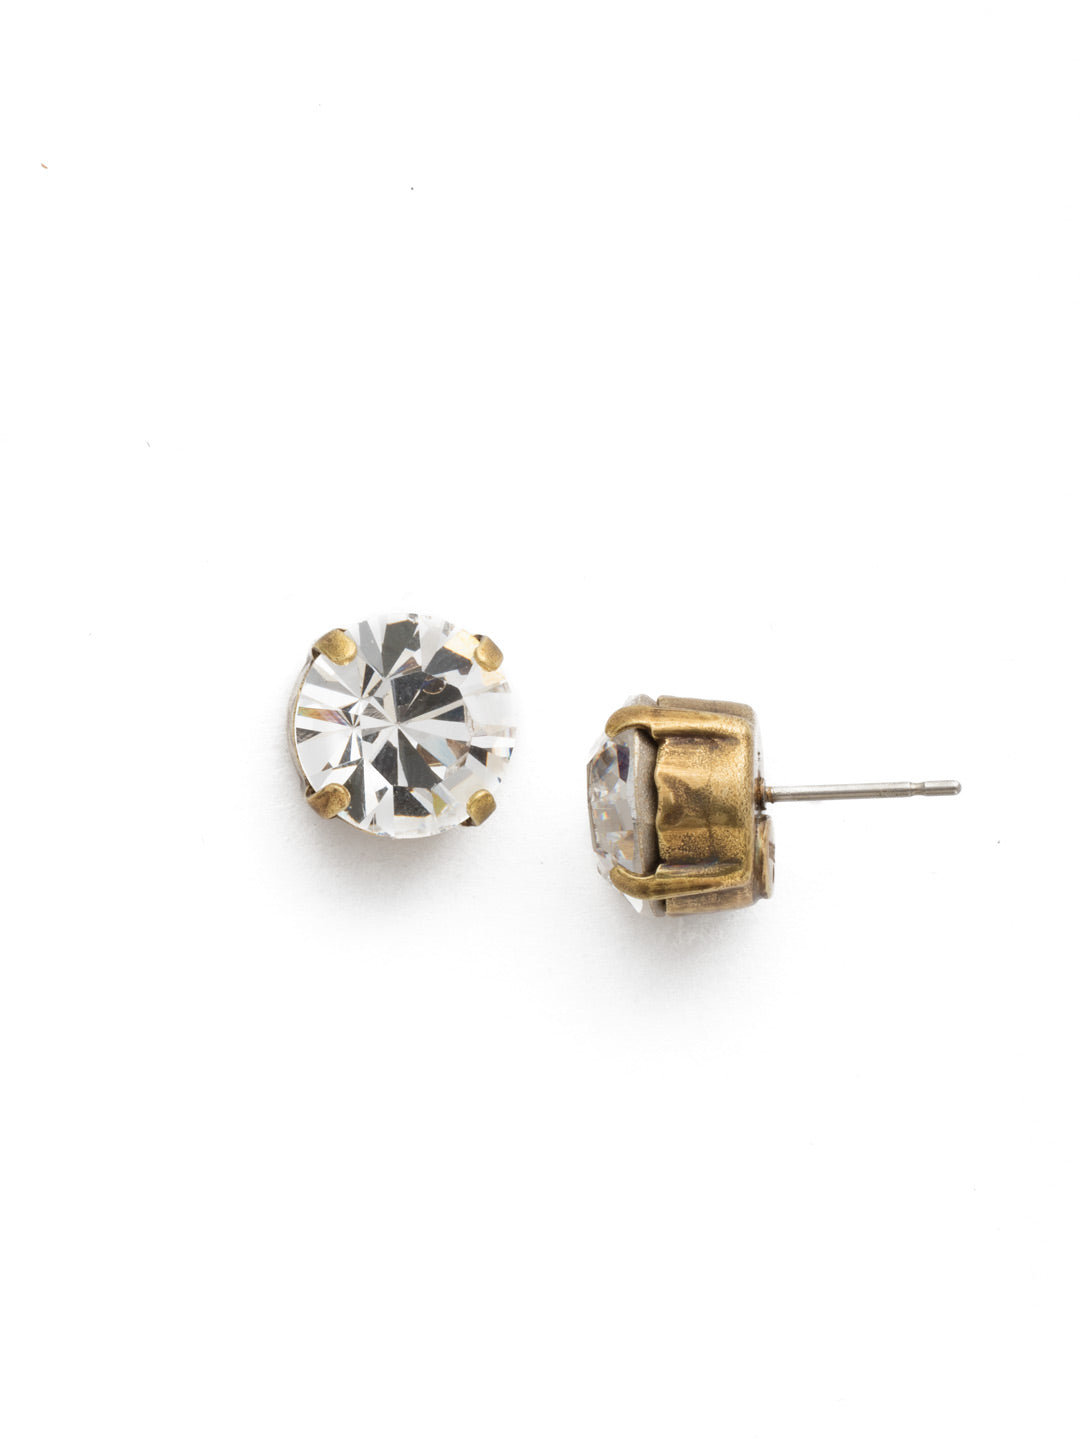 London Stud Earrings - ECM14AGCRY - <p>Everyone needs a great pair of studs. Add some classic sparkle to any occasion with these stud earrings. From Sorrelli's Crystal collection in our Antique Gold-tone finish.</p>